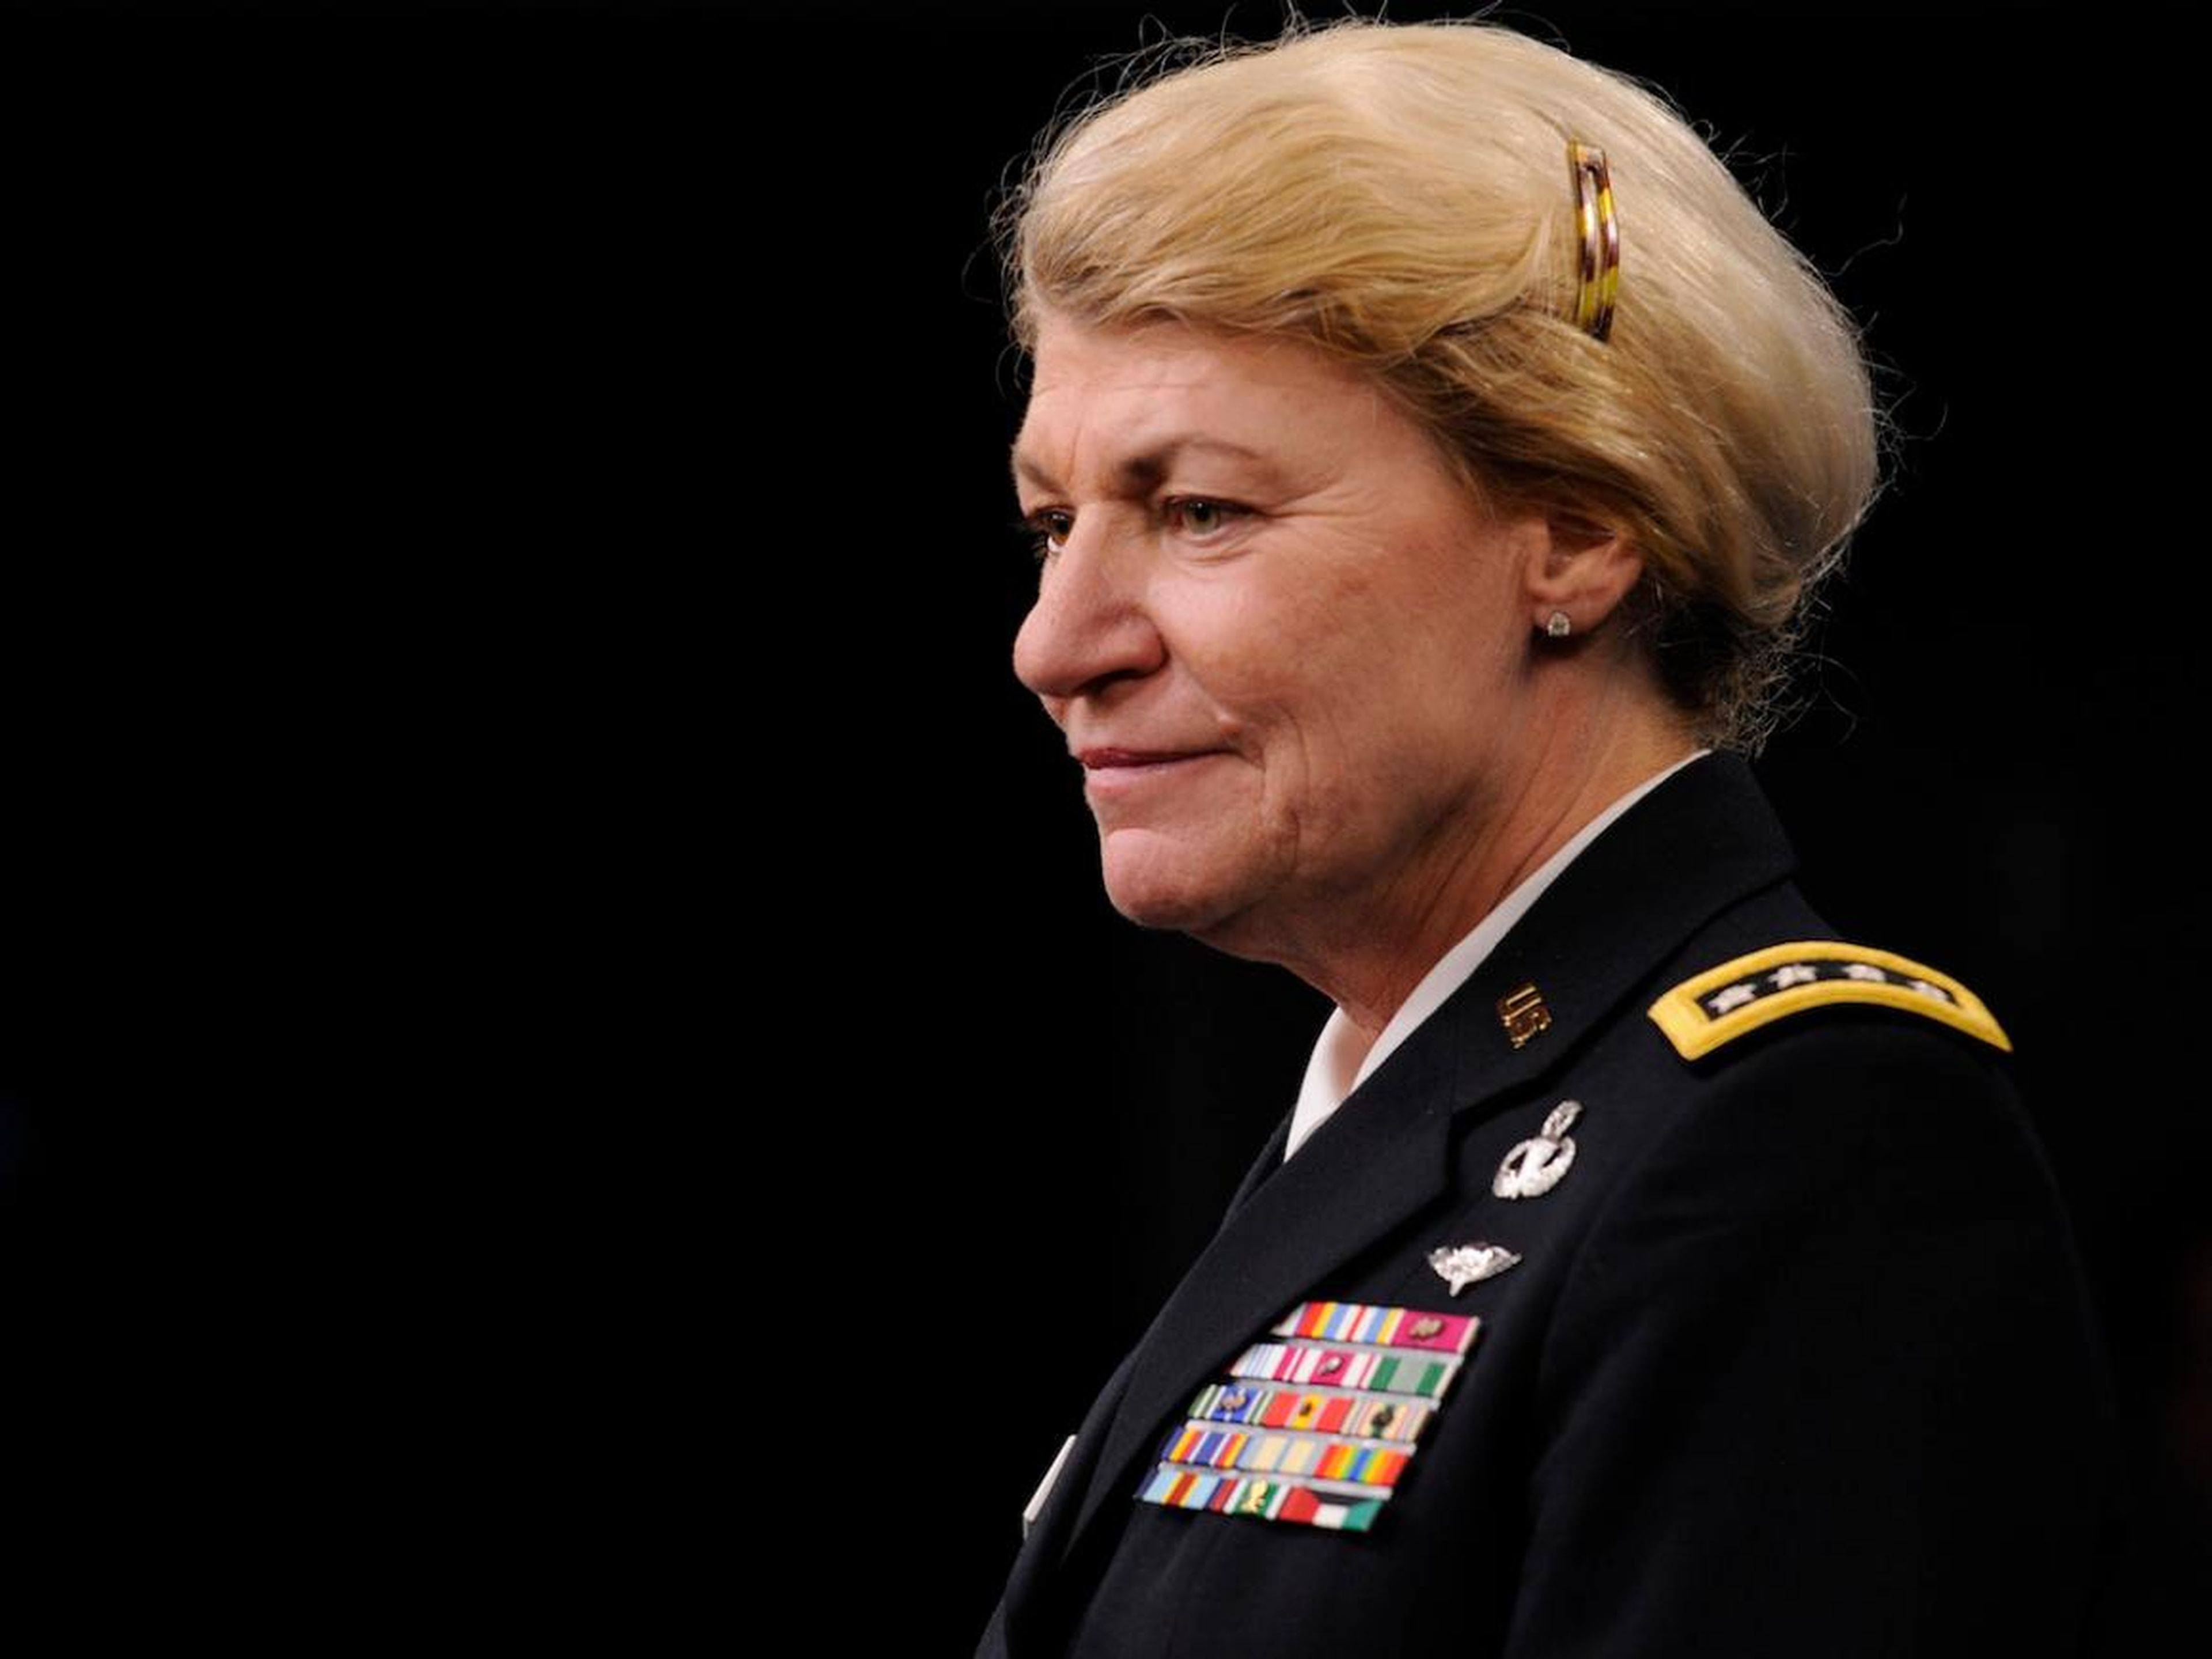 Ann Dunwoody was the first female four-star general in the Army in 2008.